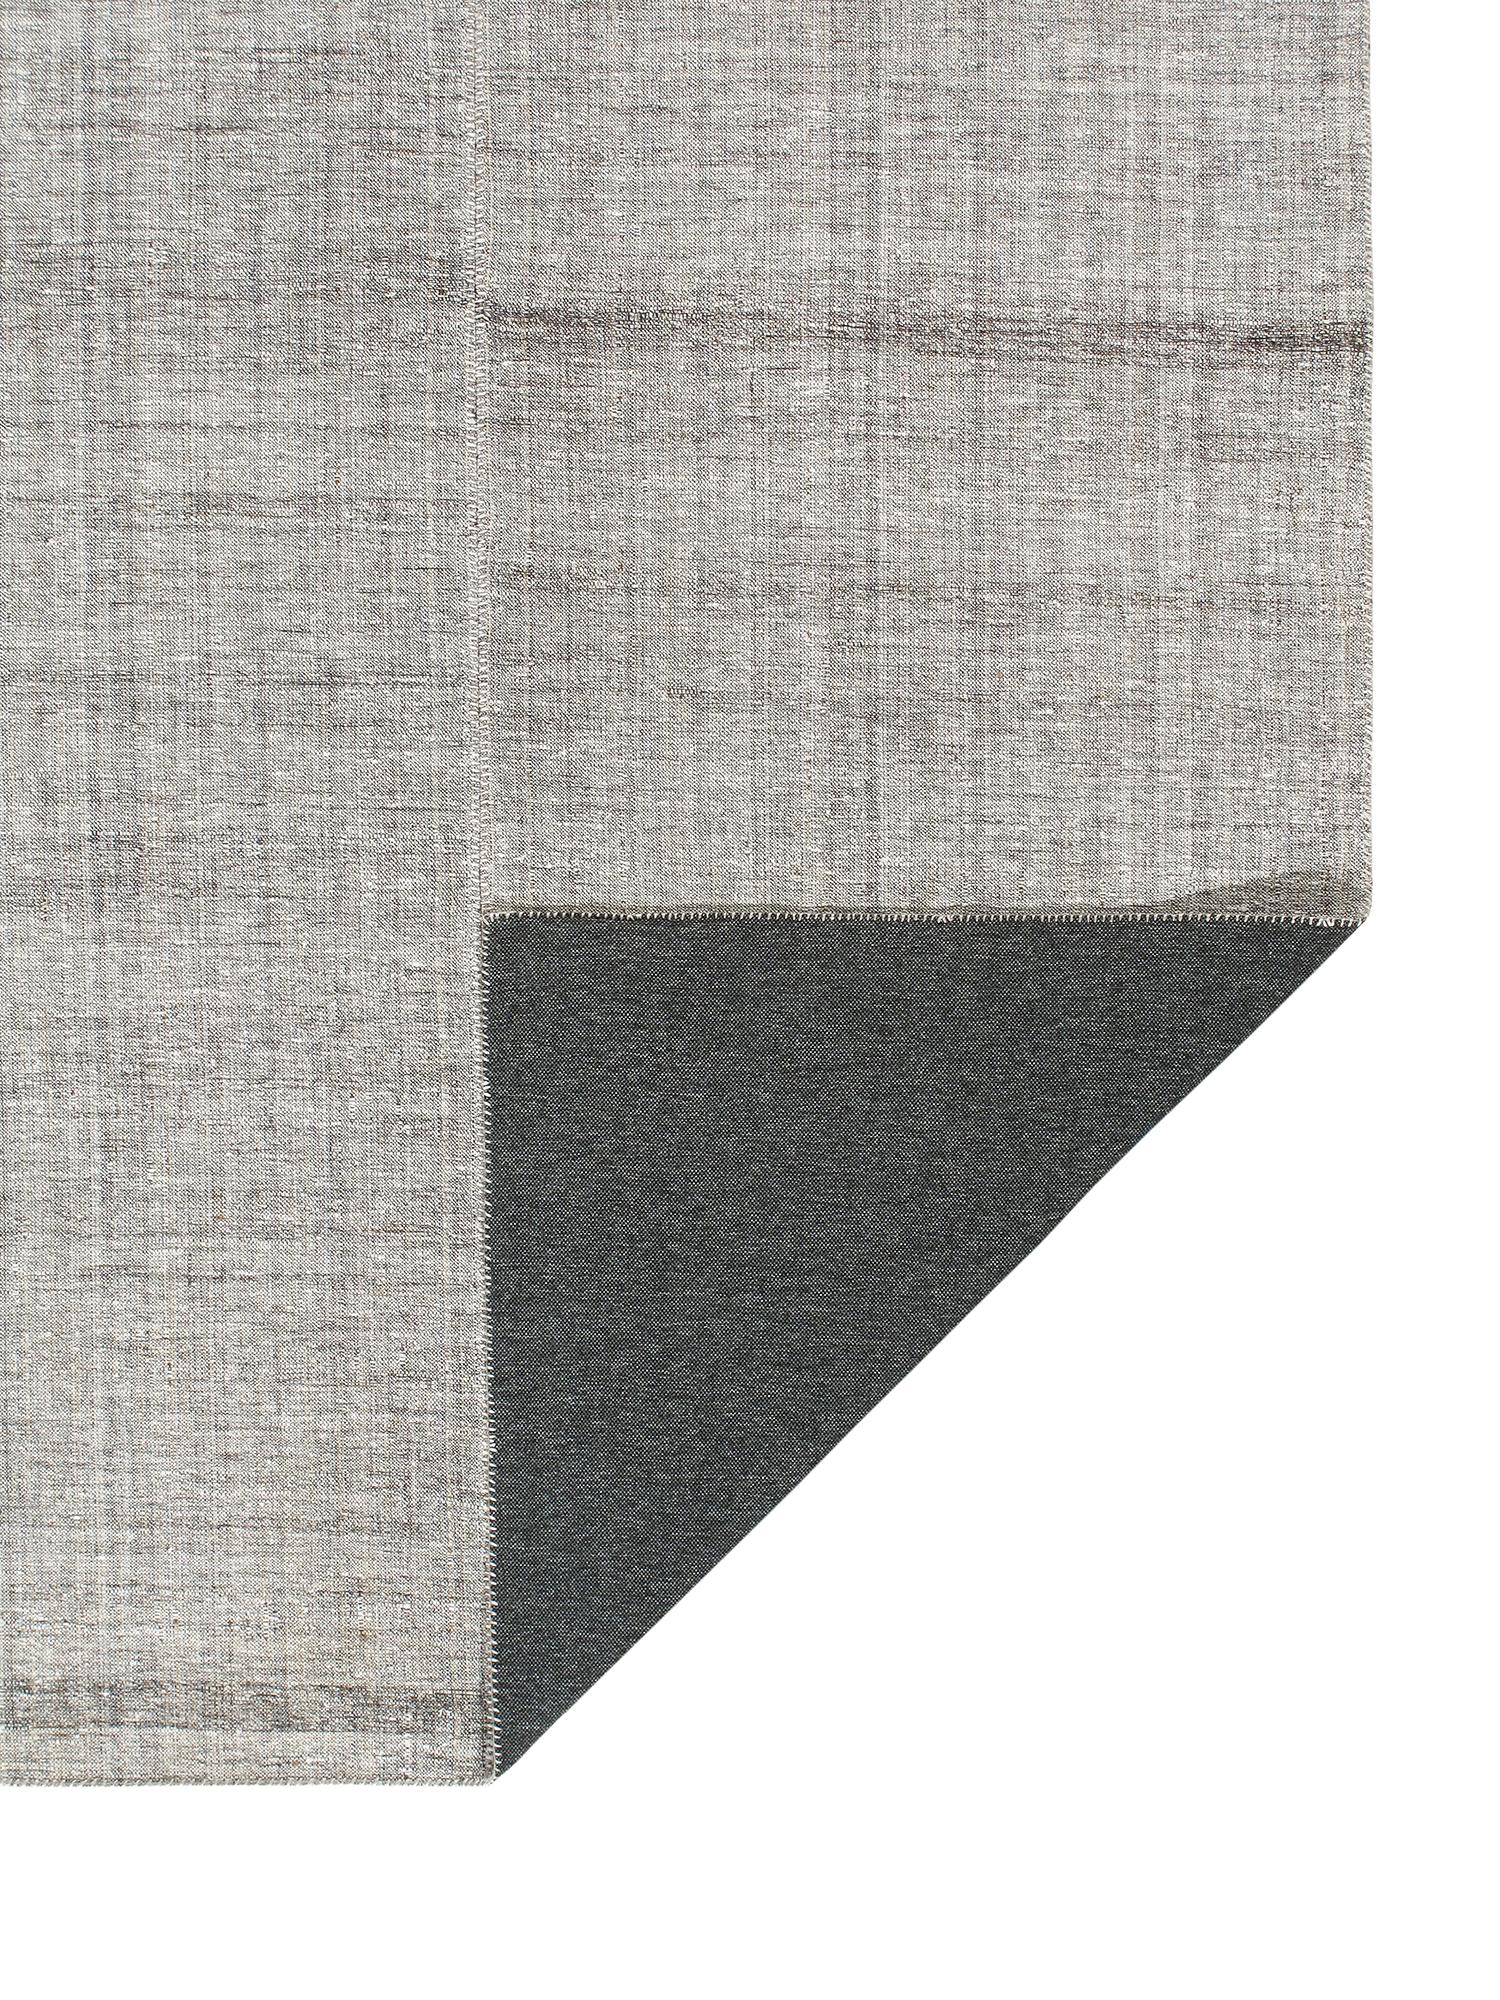 Vintage Grey Toned Pelas Rug  In Excellent Condition For Sale In New York, NY